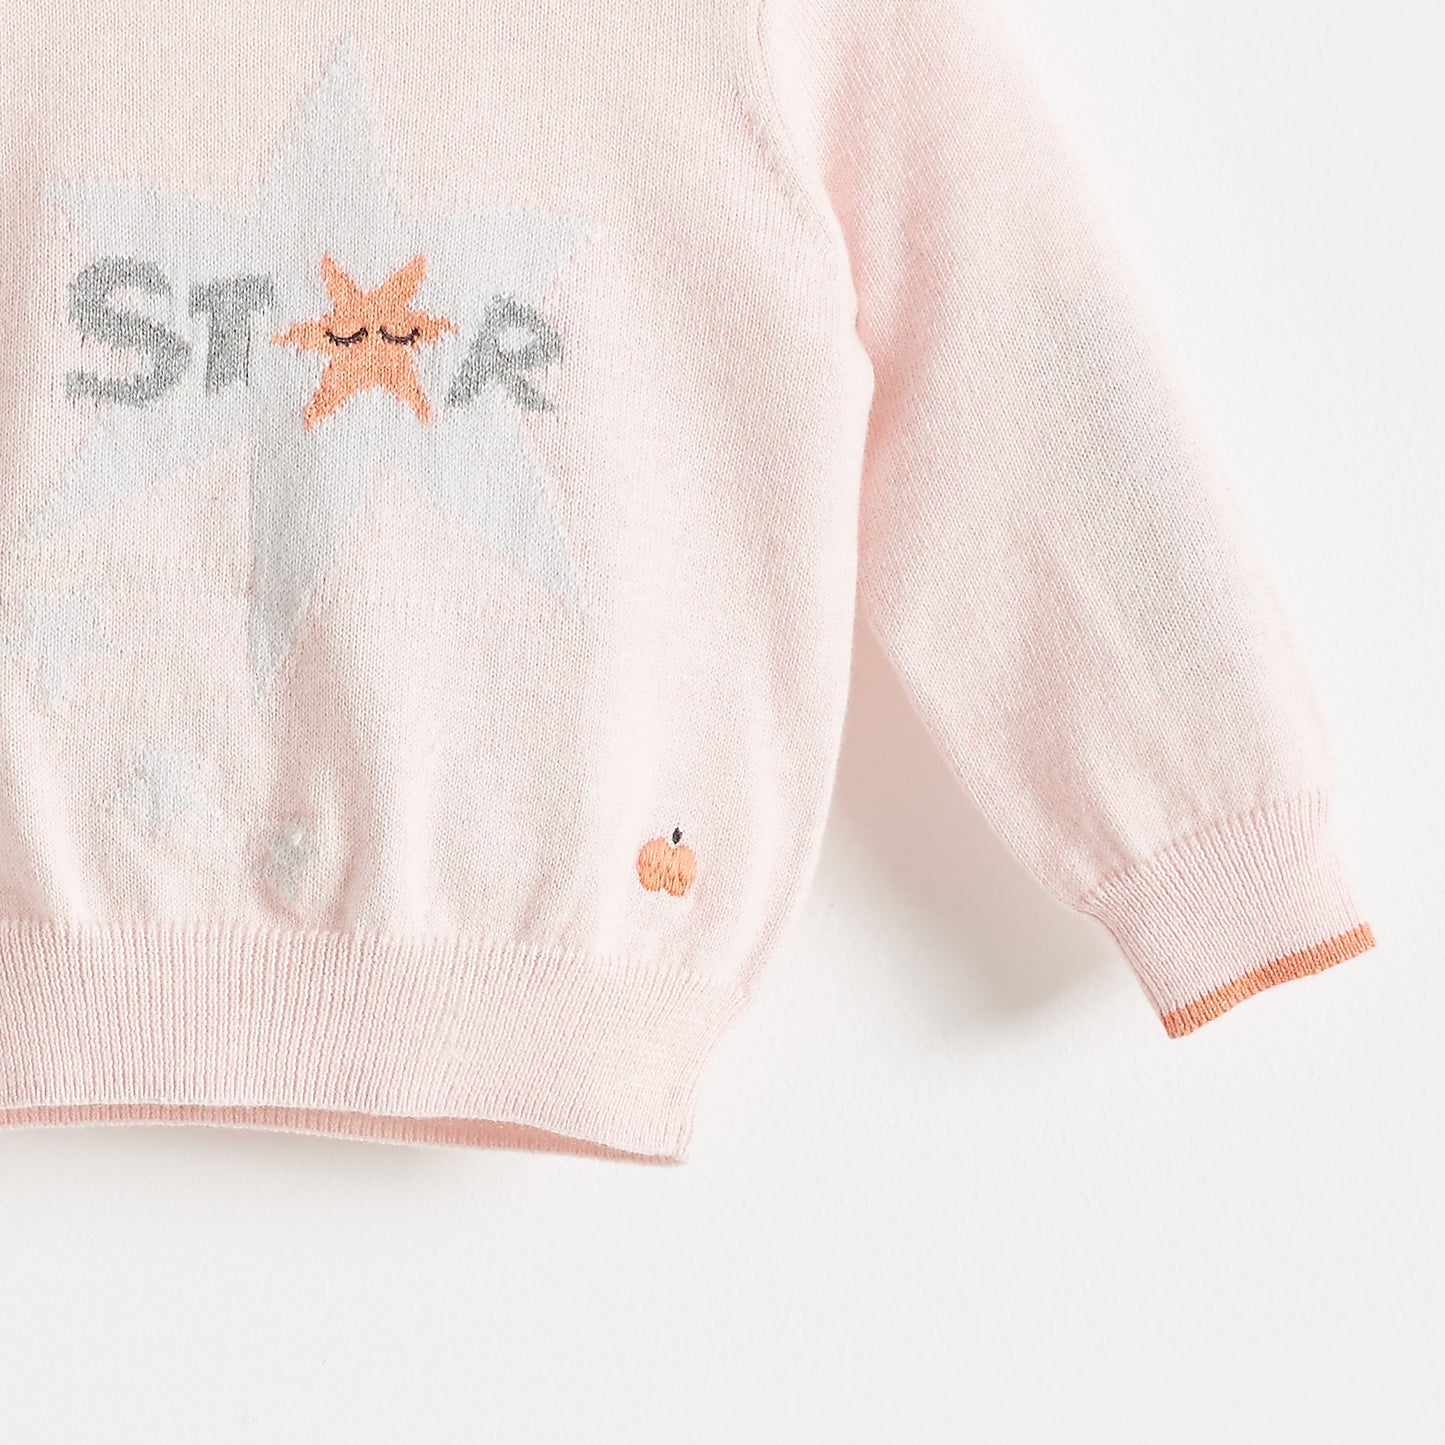 SWEATER - BABY - PALE PINK - COMET